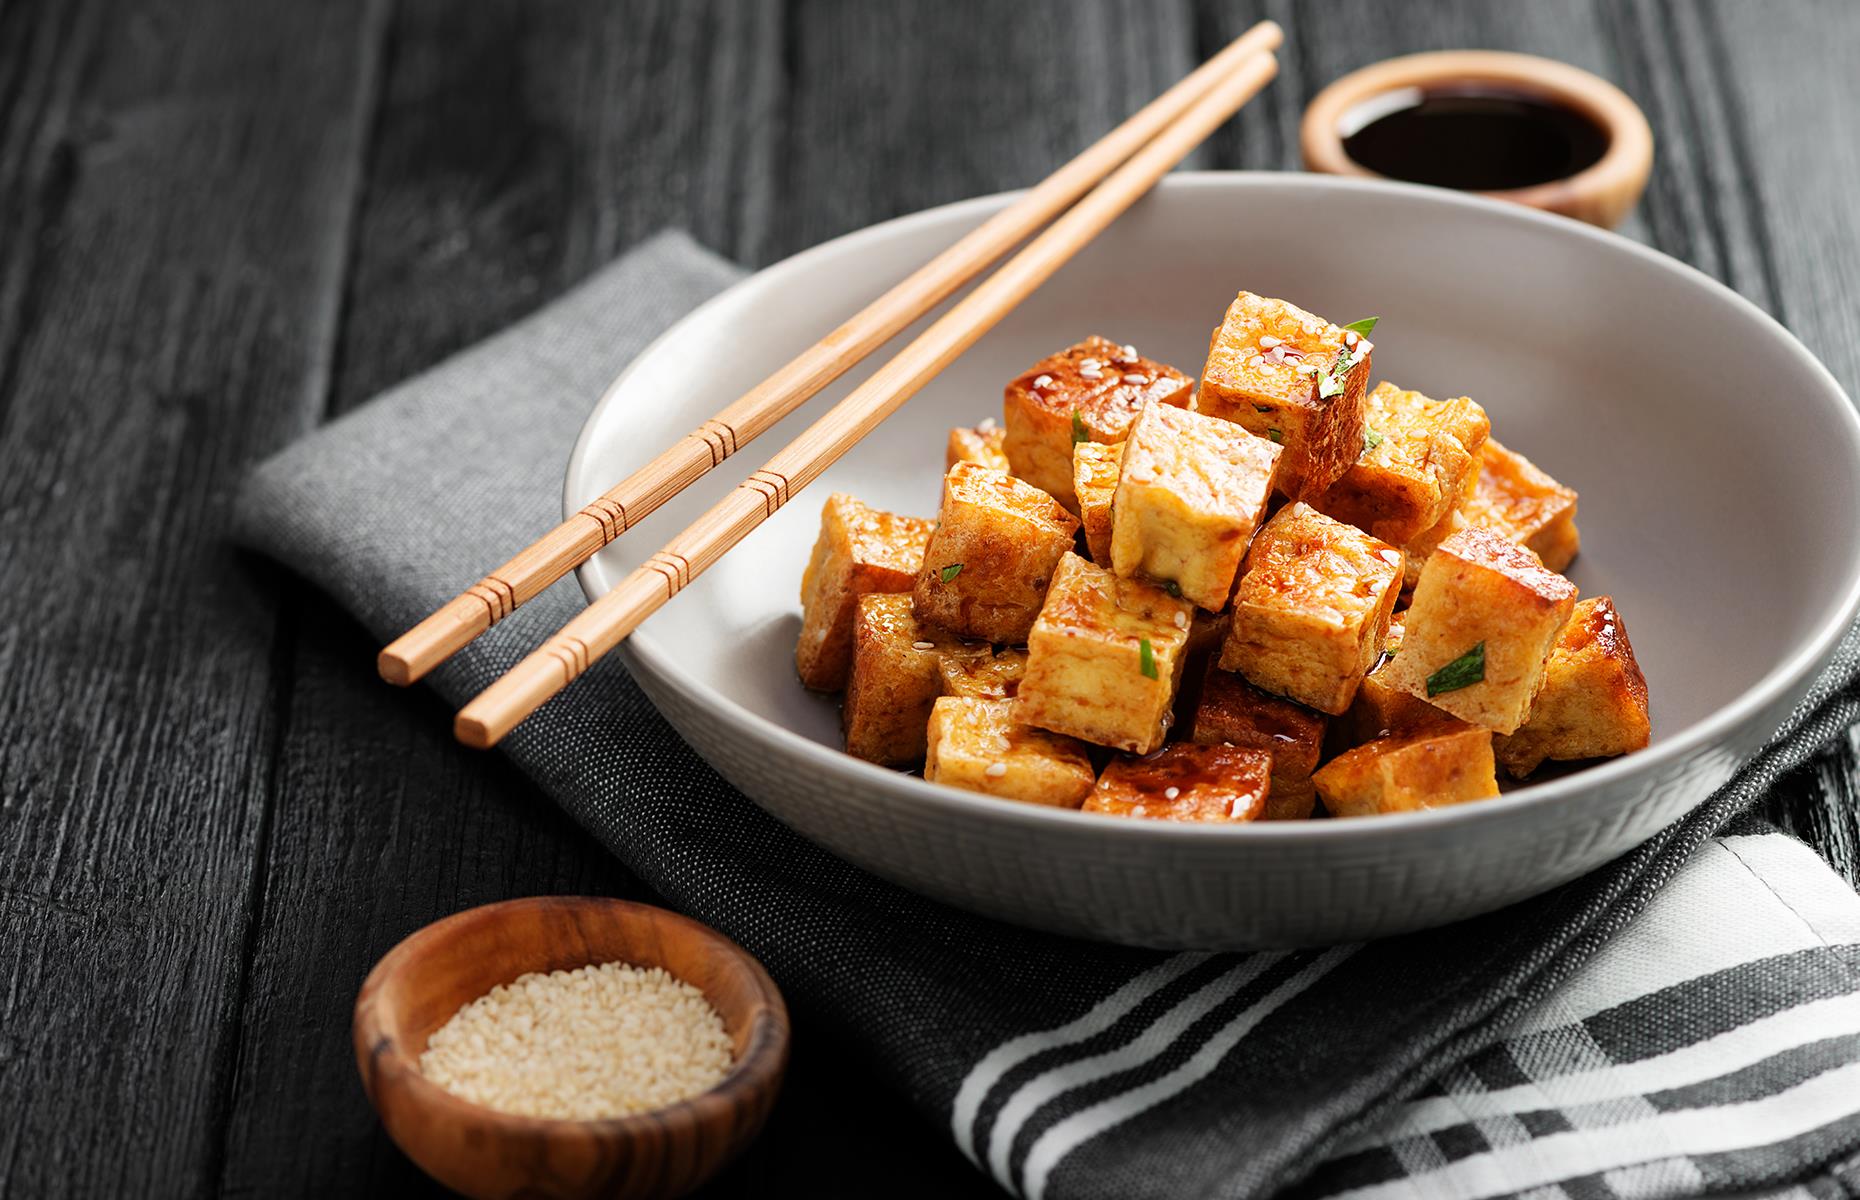 <p>In the UK and US, tofu was once eschewed as something for hippies and health-food nuts – but this versatile ingredient, made from soya milk curds, has soared in popularity in recent years. Many Asian cultures have long recognised its virtues though. Its exact origins are unclear but one story pins it to a Chinese cook who lived some 2,000 years ago – <a href="https://www.bbcgoodfood.com/howto/guide/ingredient-focus-tofu#:~:text=Like%20many%20soya%20foods%2C%20tofu,come%20into%20use%20until%201400.">legend has it</a>, the chef produced tofu when he accidentally curdled soya milk by adding seaweed to it.</p>